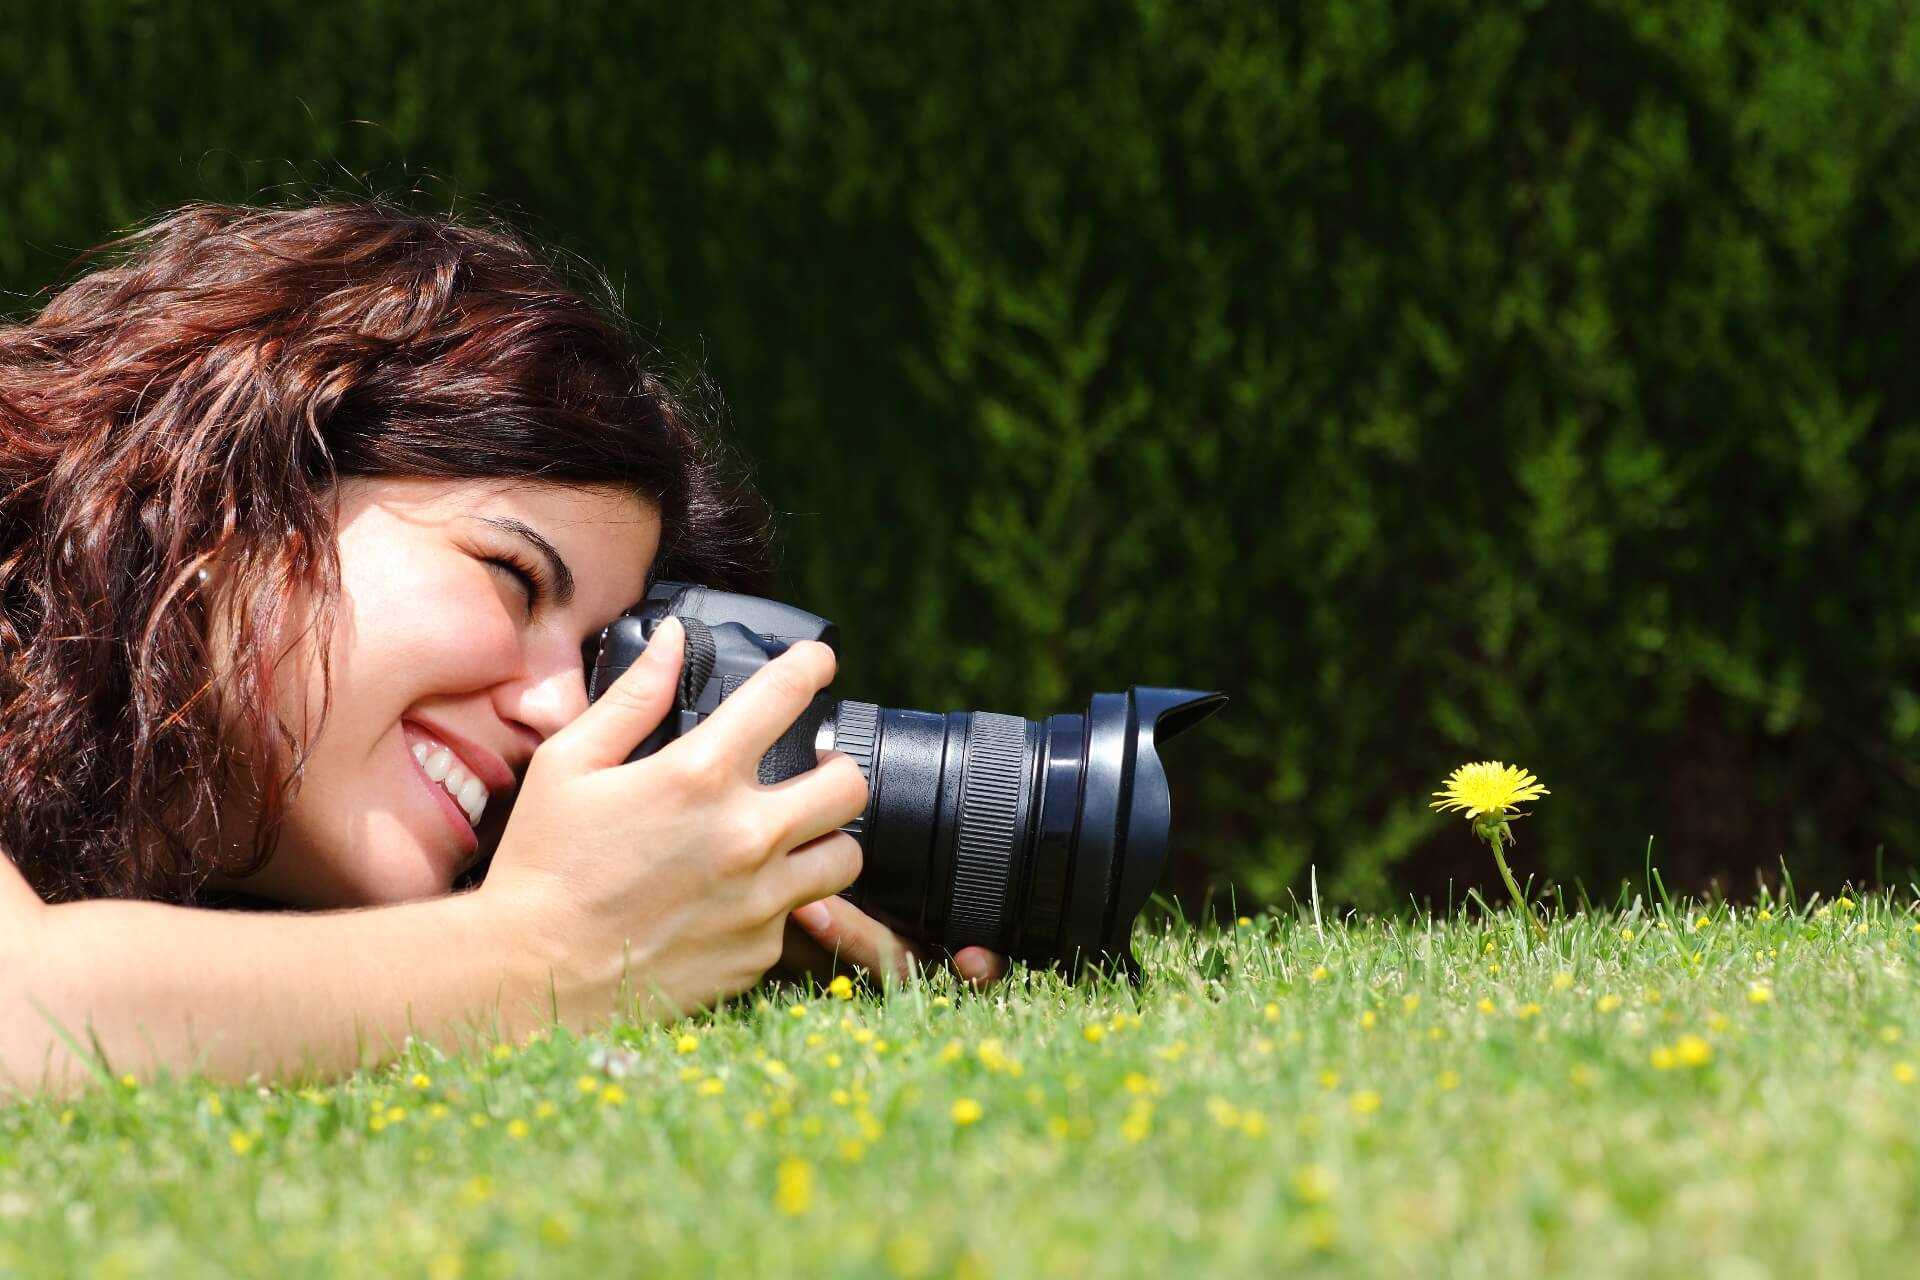 How To Take Close-Up Pictures With A DSLR Camera